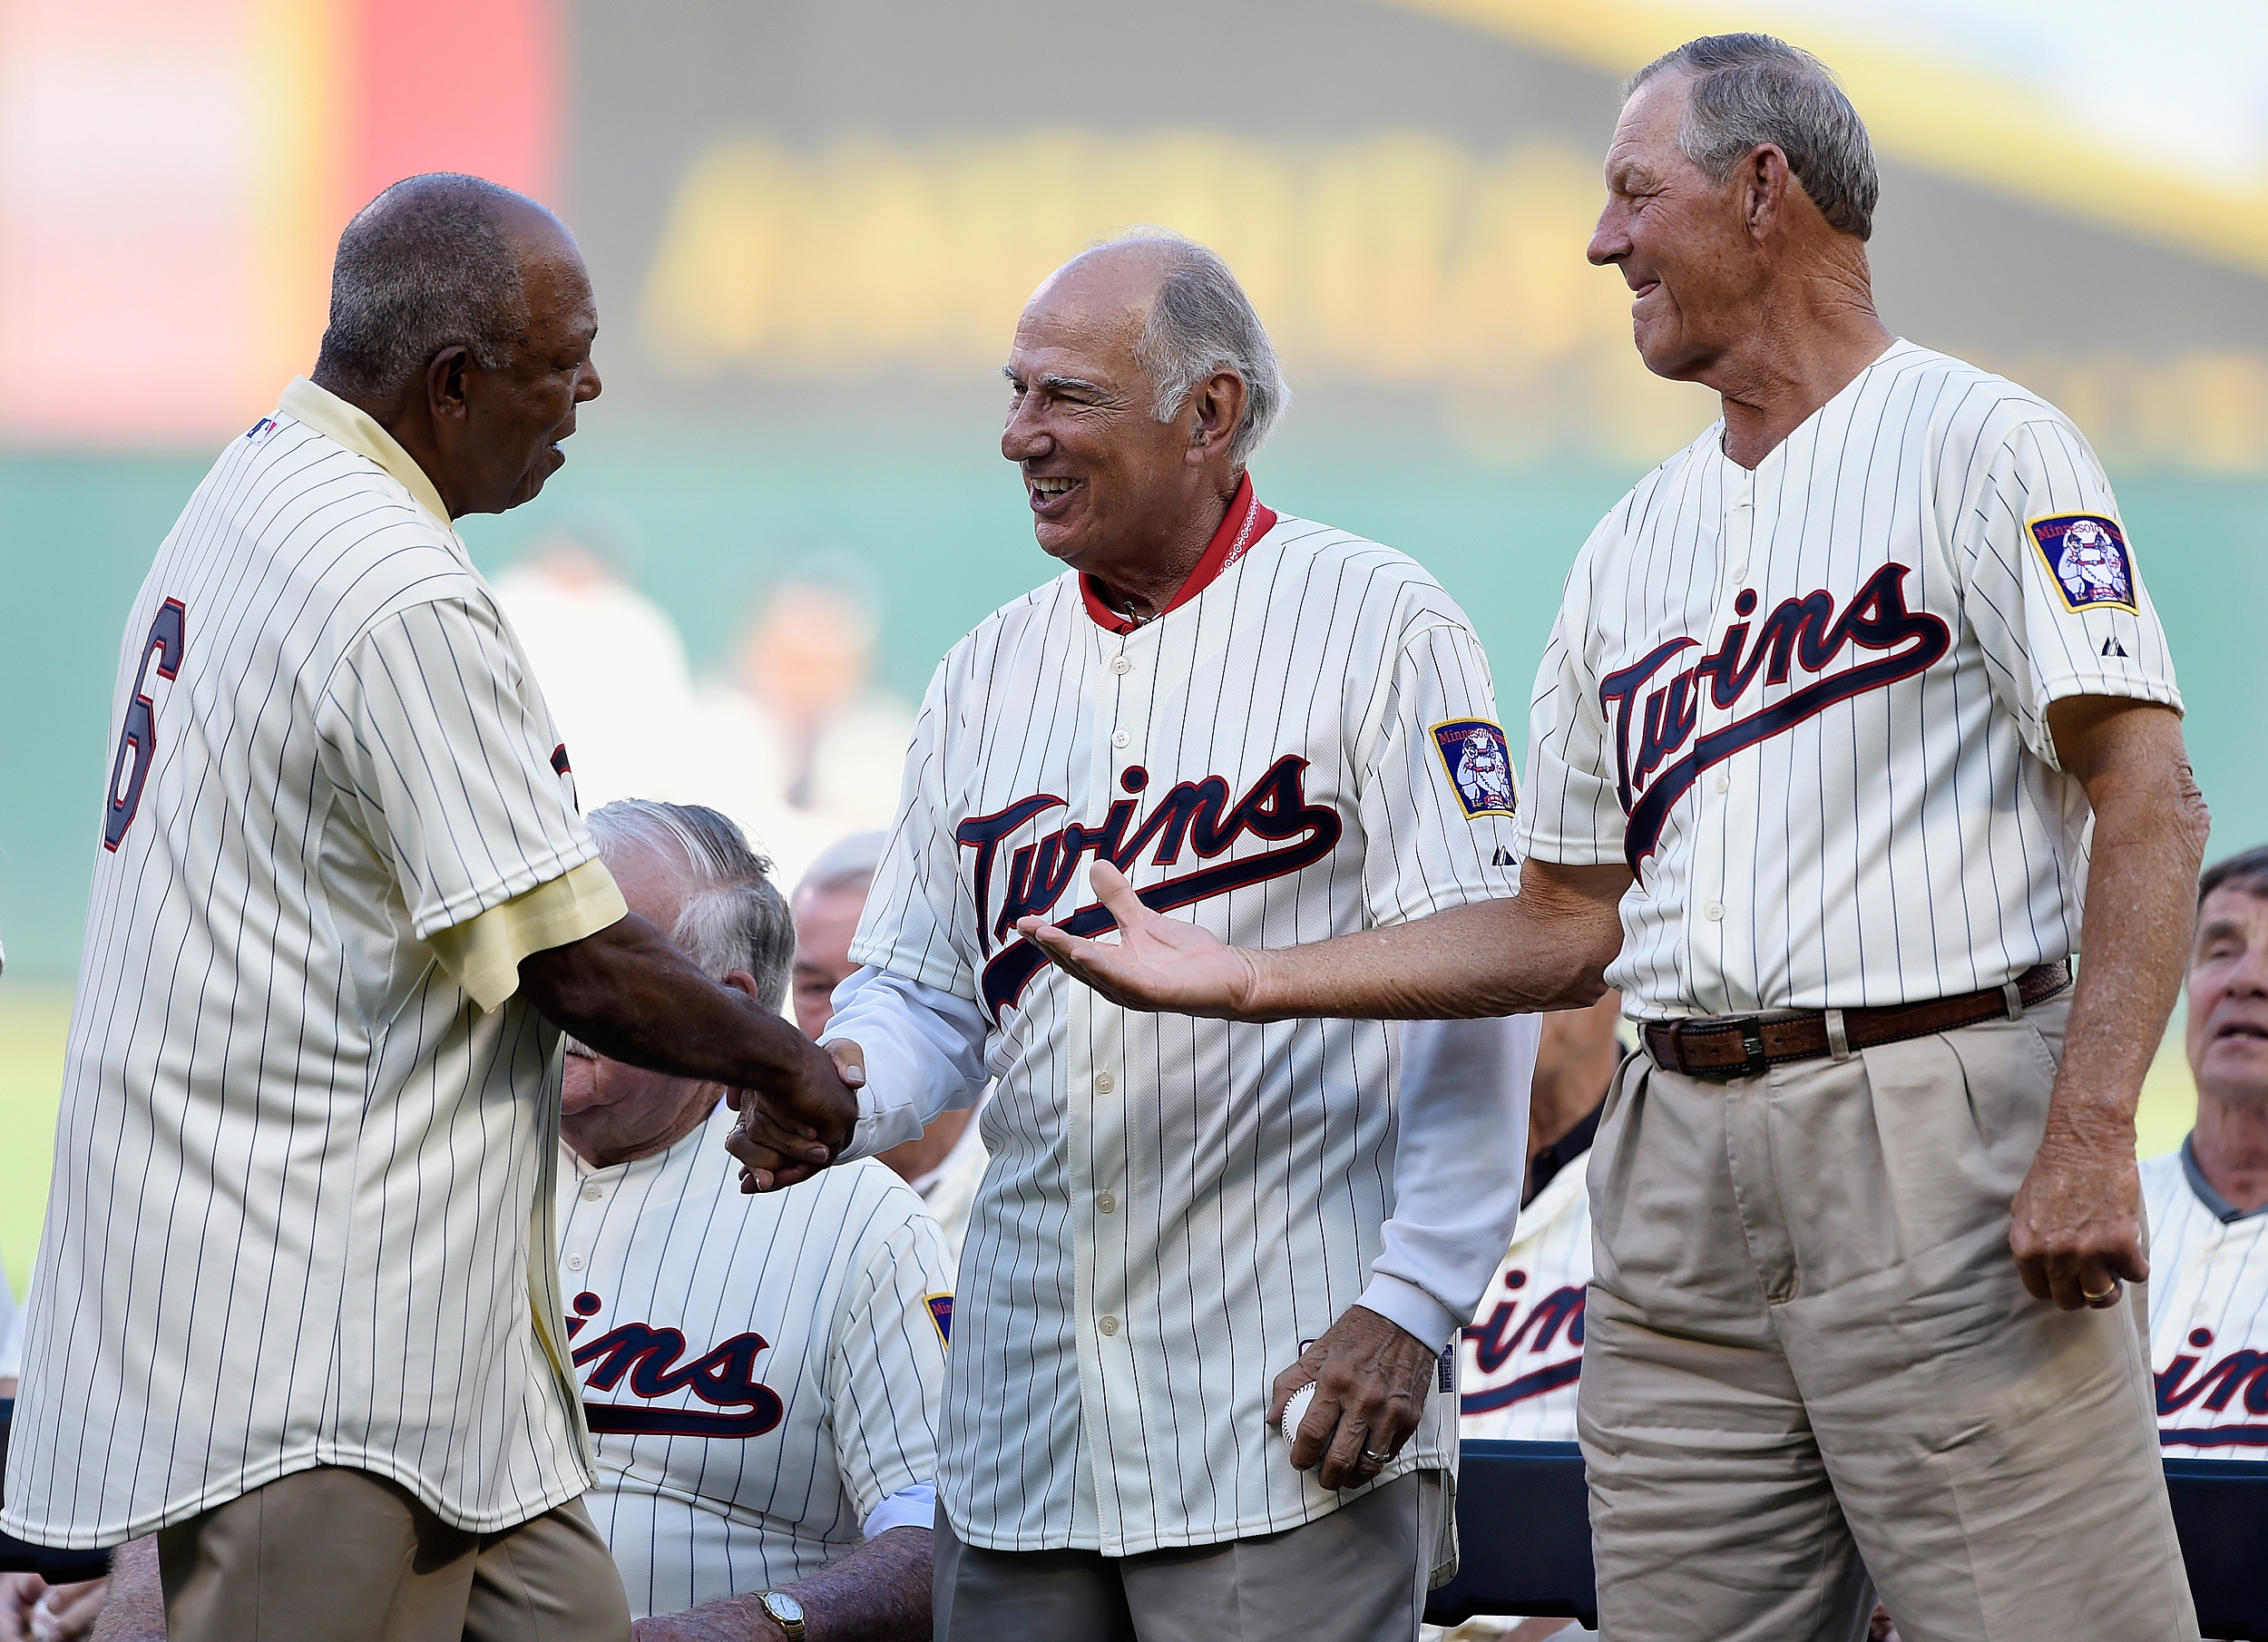 Rod Carew or Kirby Puckett: Who Had the Better Career? - Twins - Twins Daily